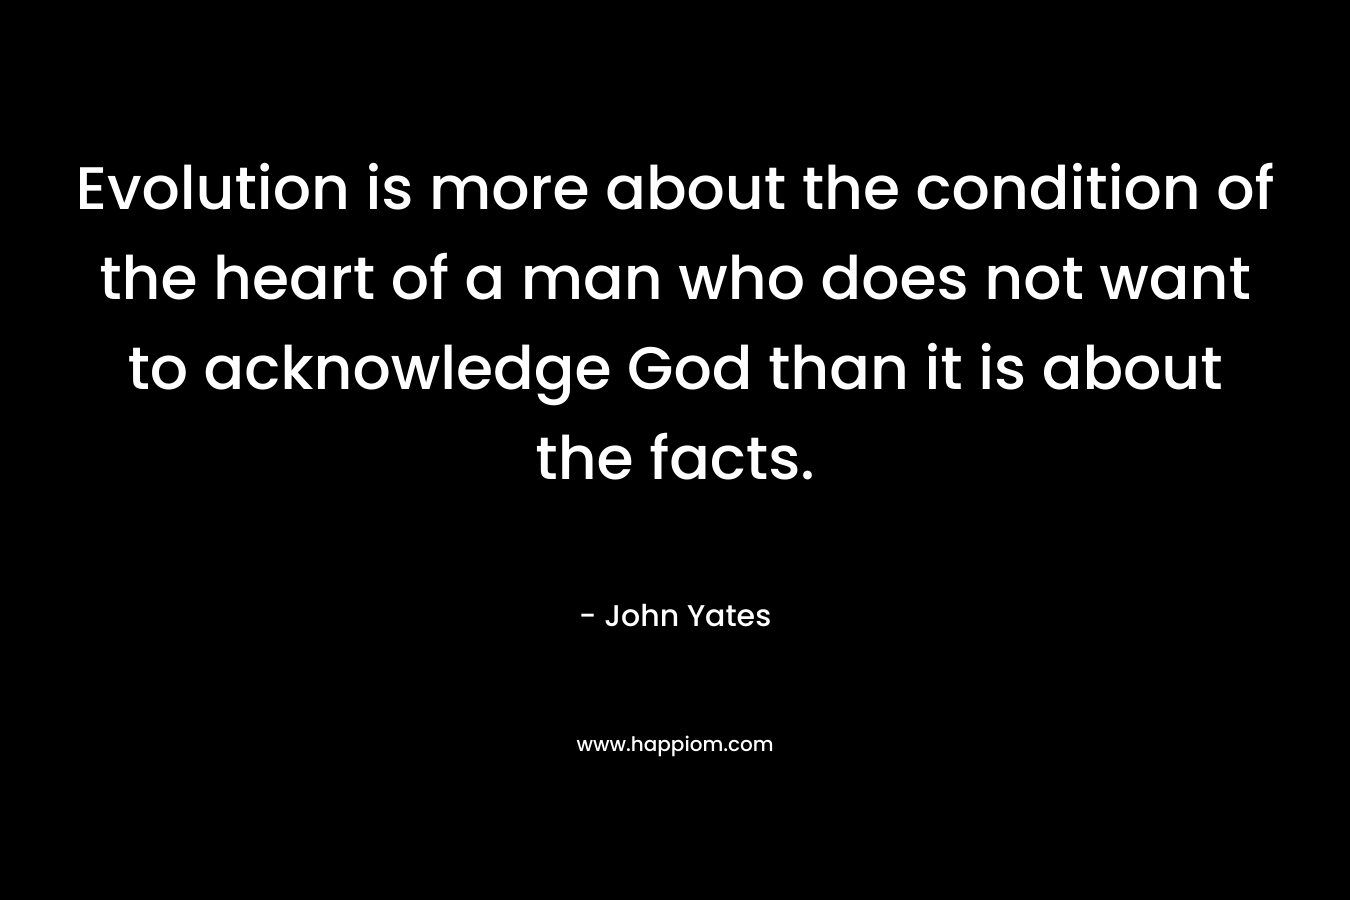 Evolution is more about the condition of the heart of a man who does not want to acknowledge God than it is about the facts.